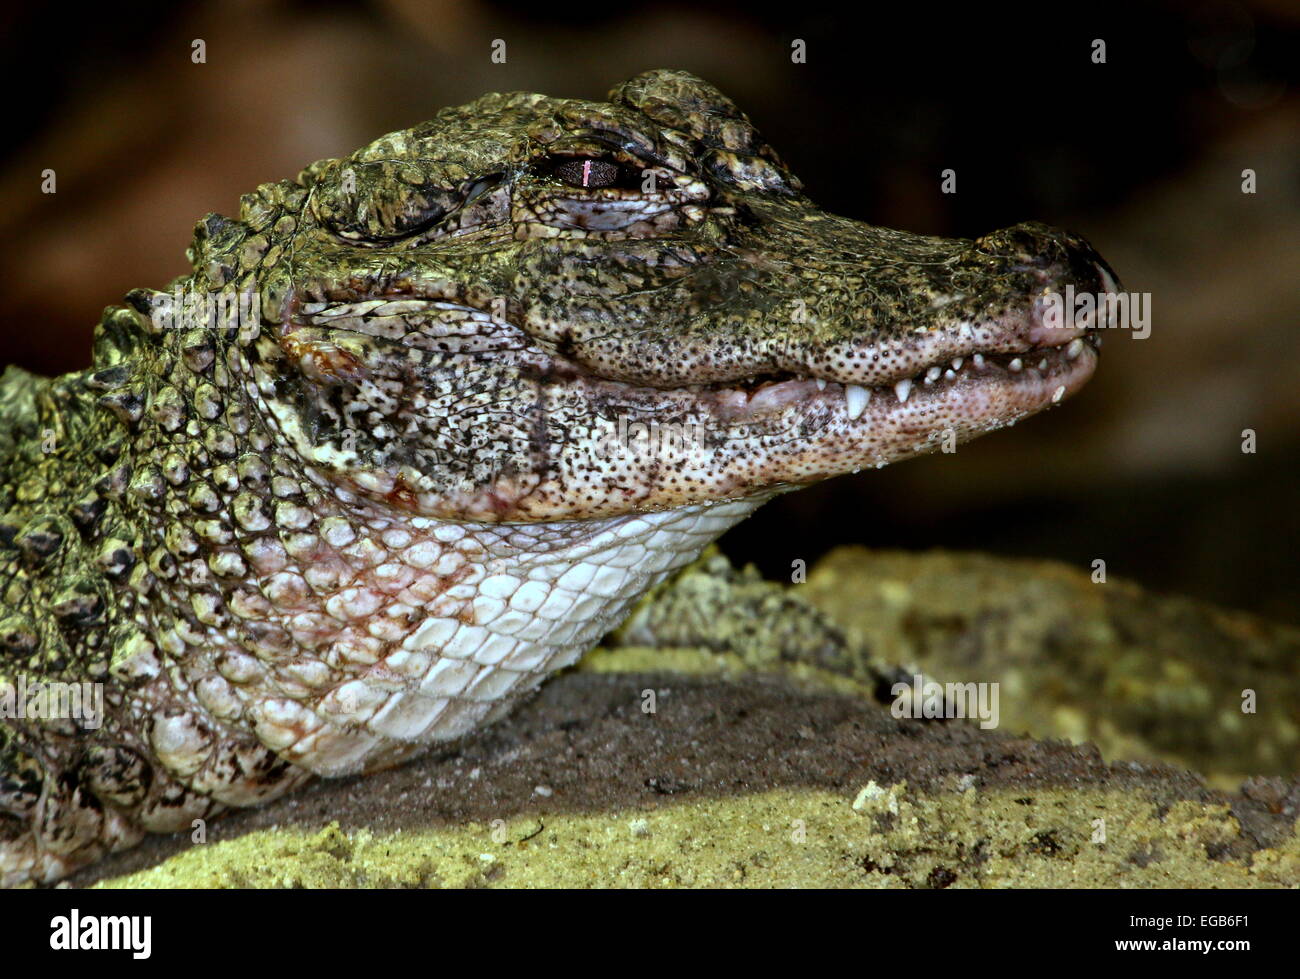 Close-up of the small fully-armoured Chinese alligator (Alligator sinensis) Stock Photo